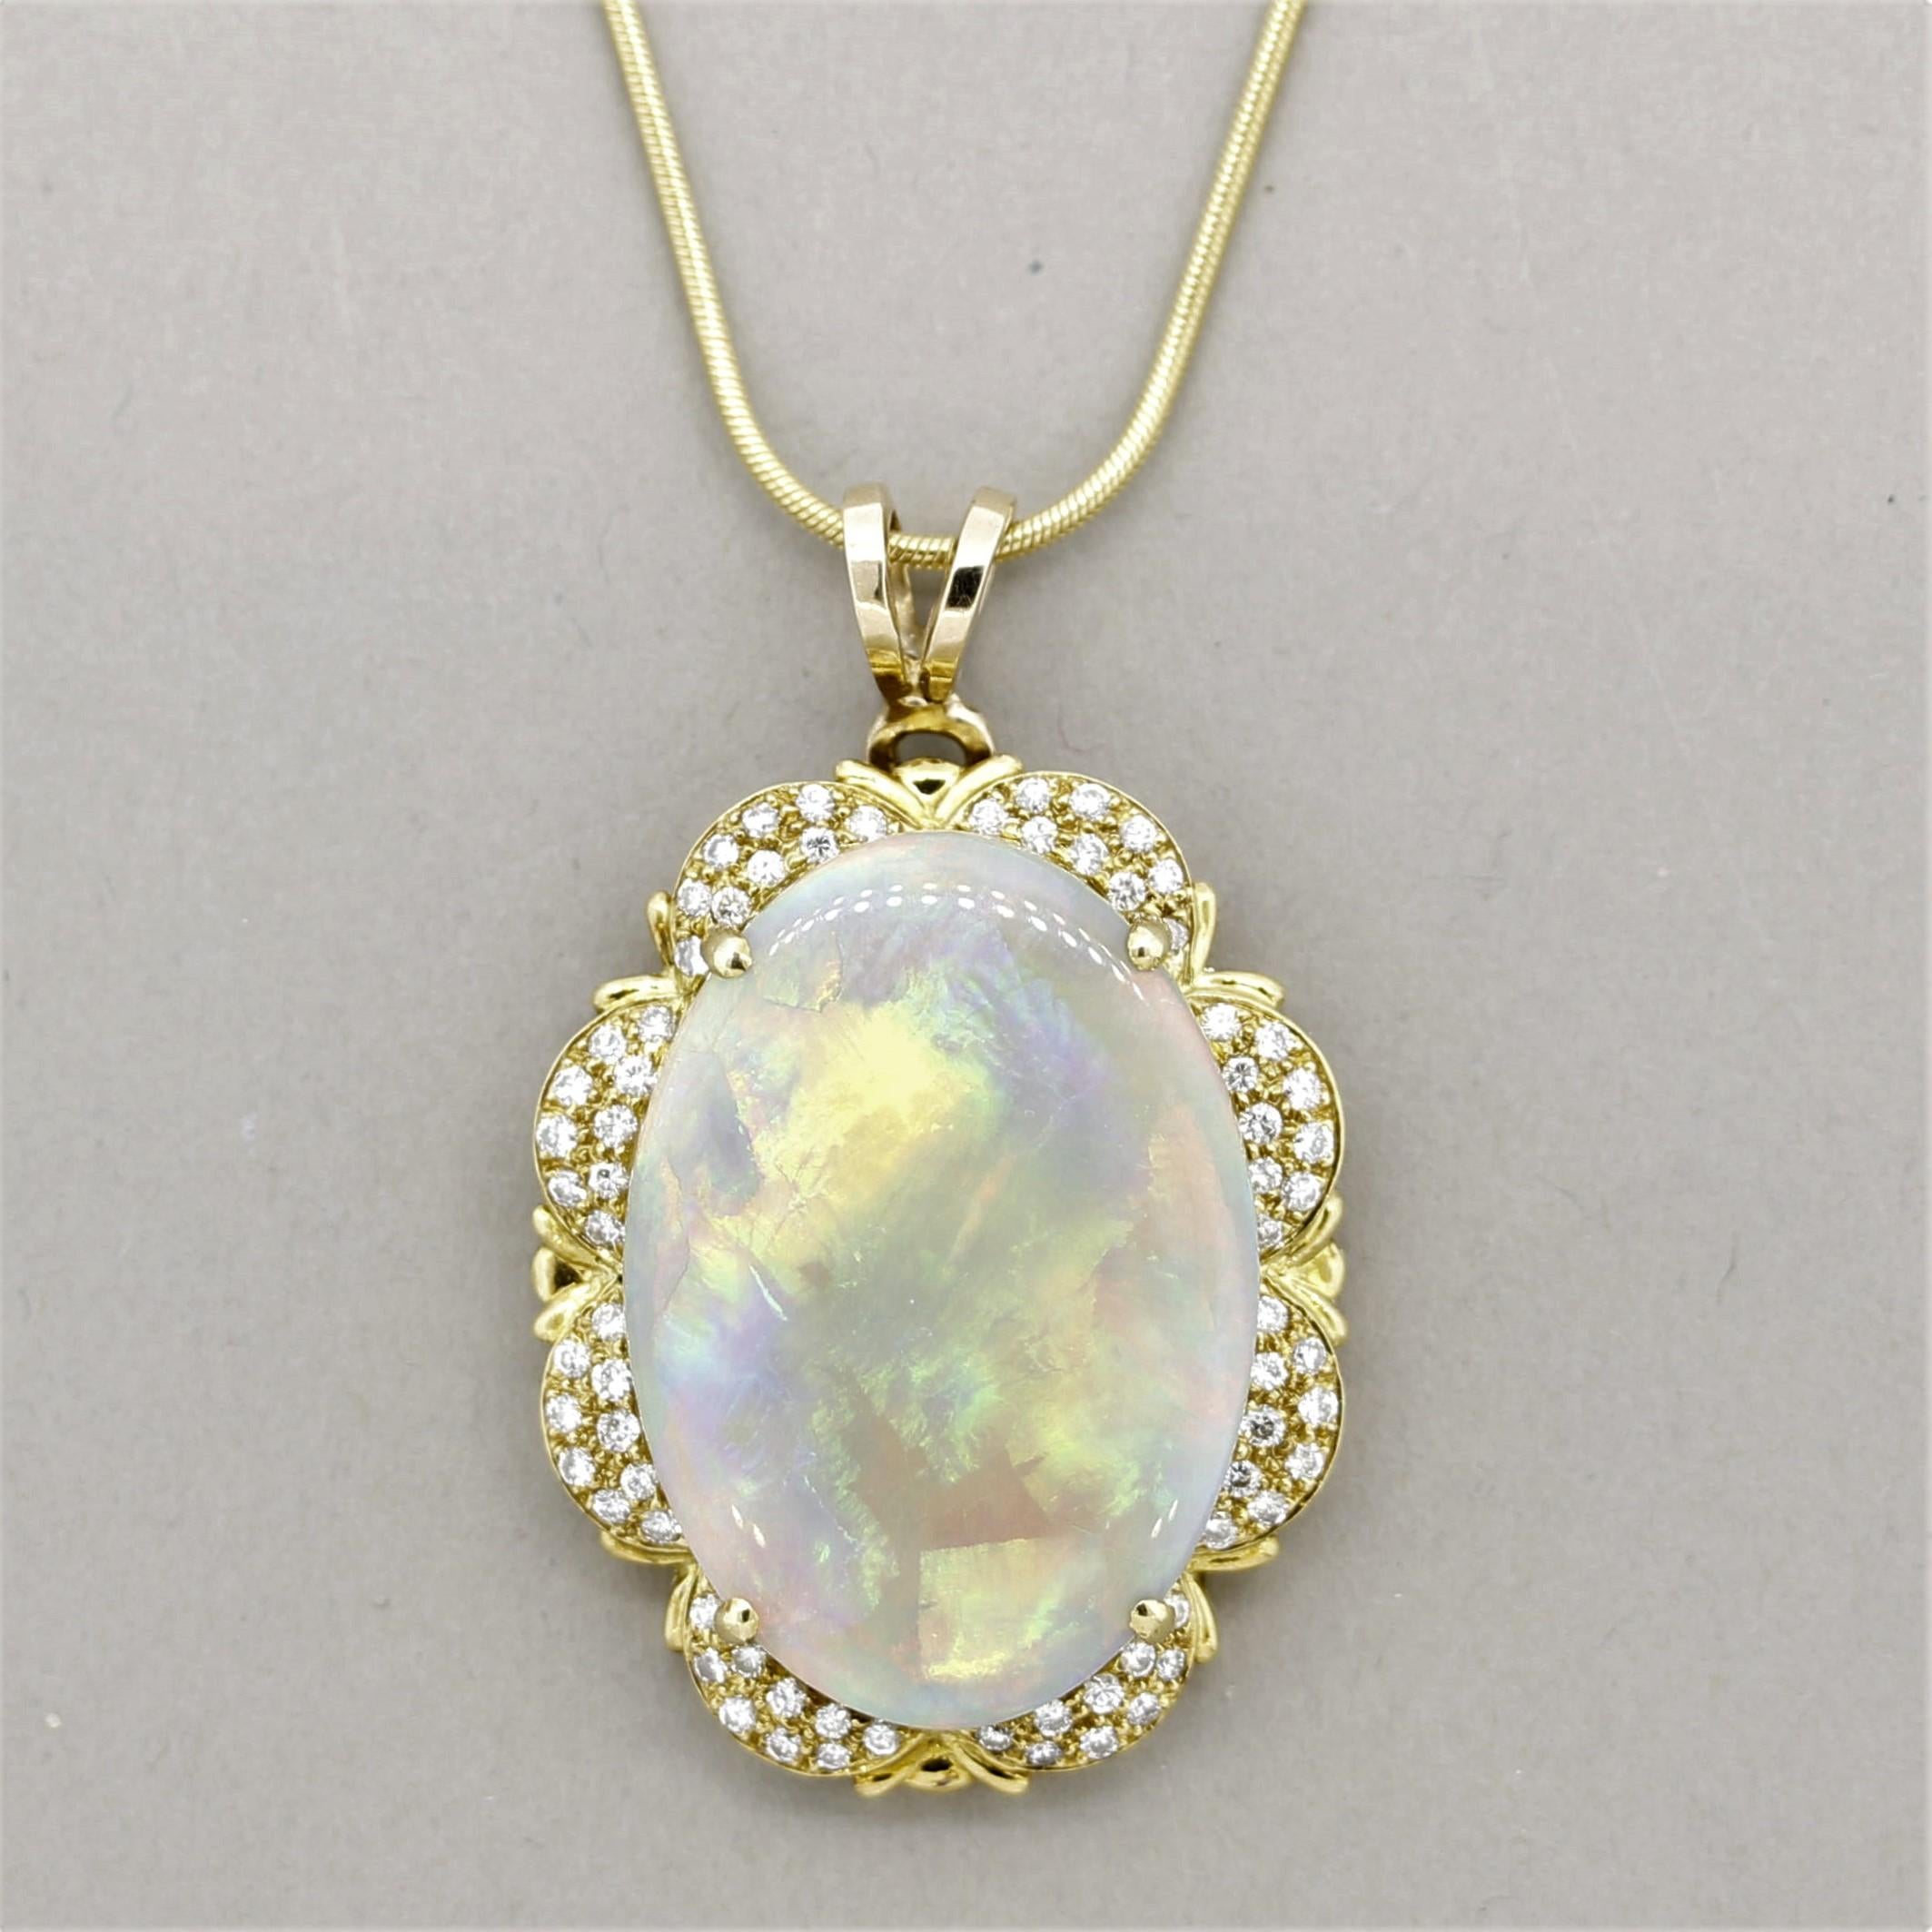 A large and impressive Australian opal takes center stage! It weighs approximately 12 carats and has excellent play-of-color. Bright and large flashes of predominantly red, green, and orange can be seen across the entirety of the opal as well as